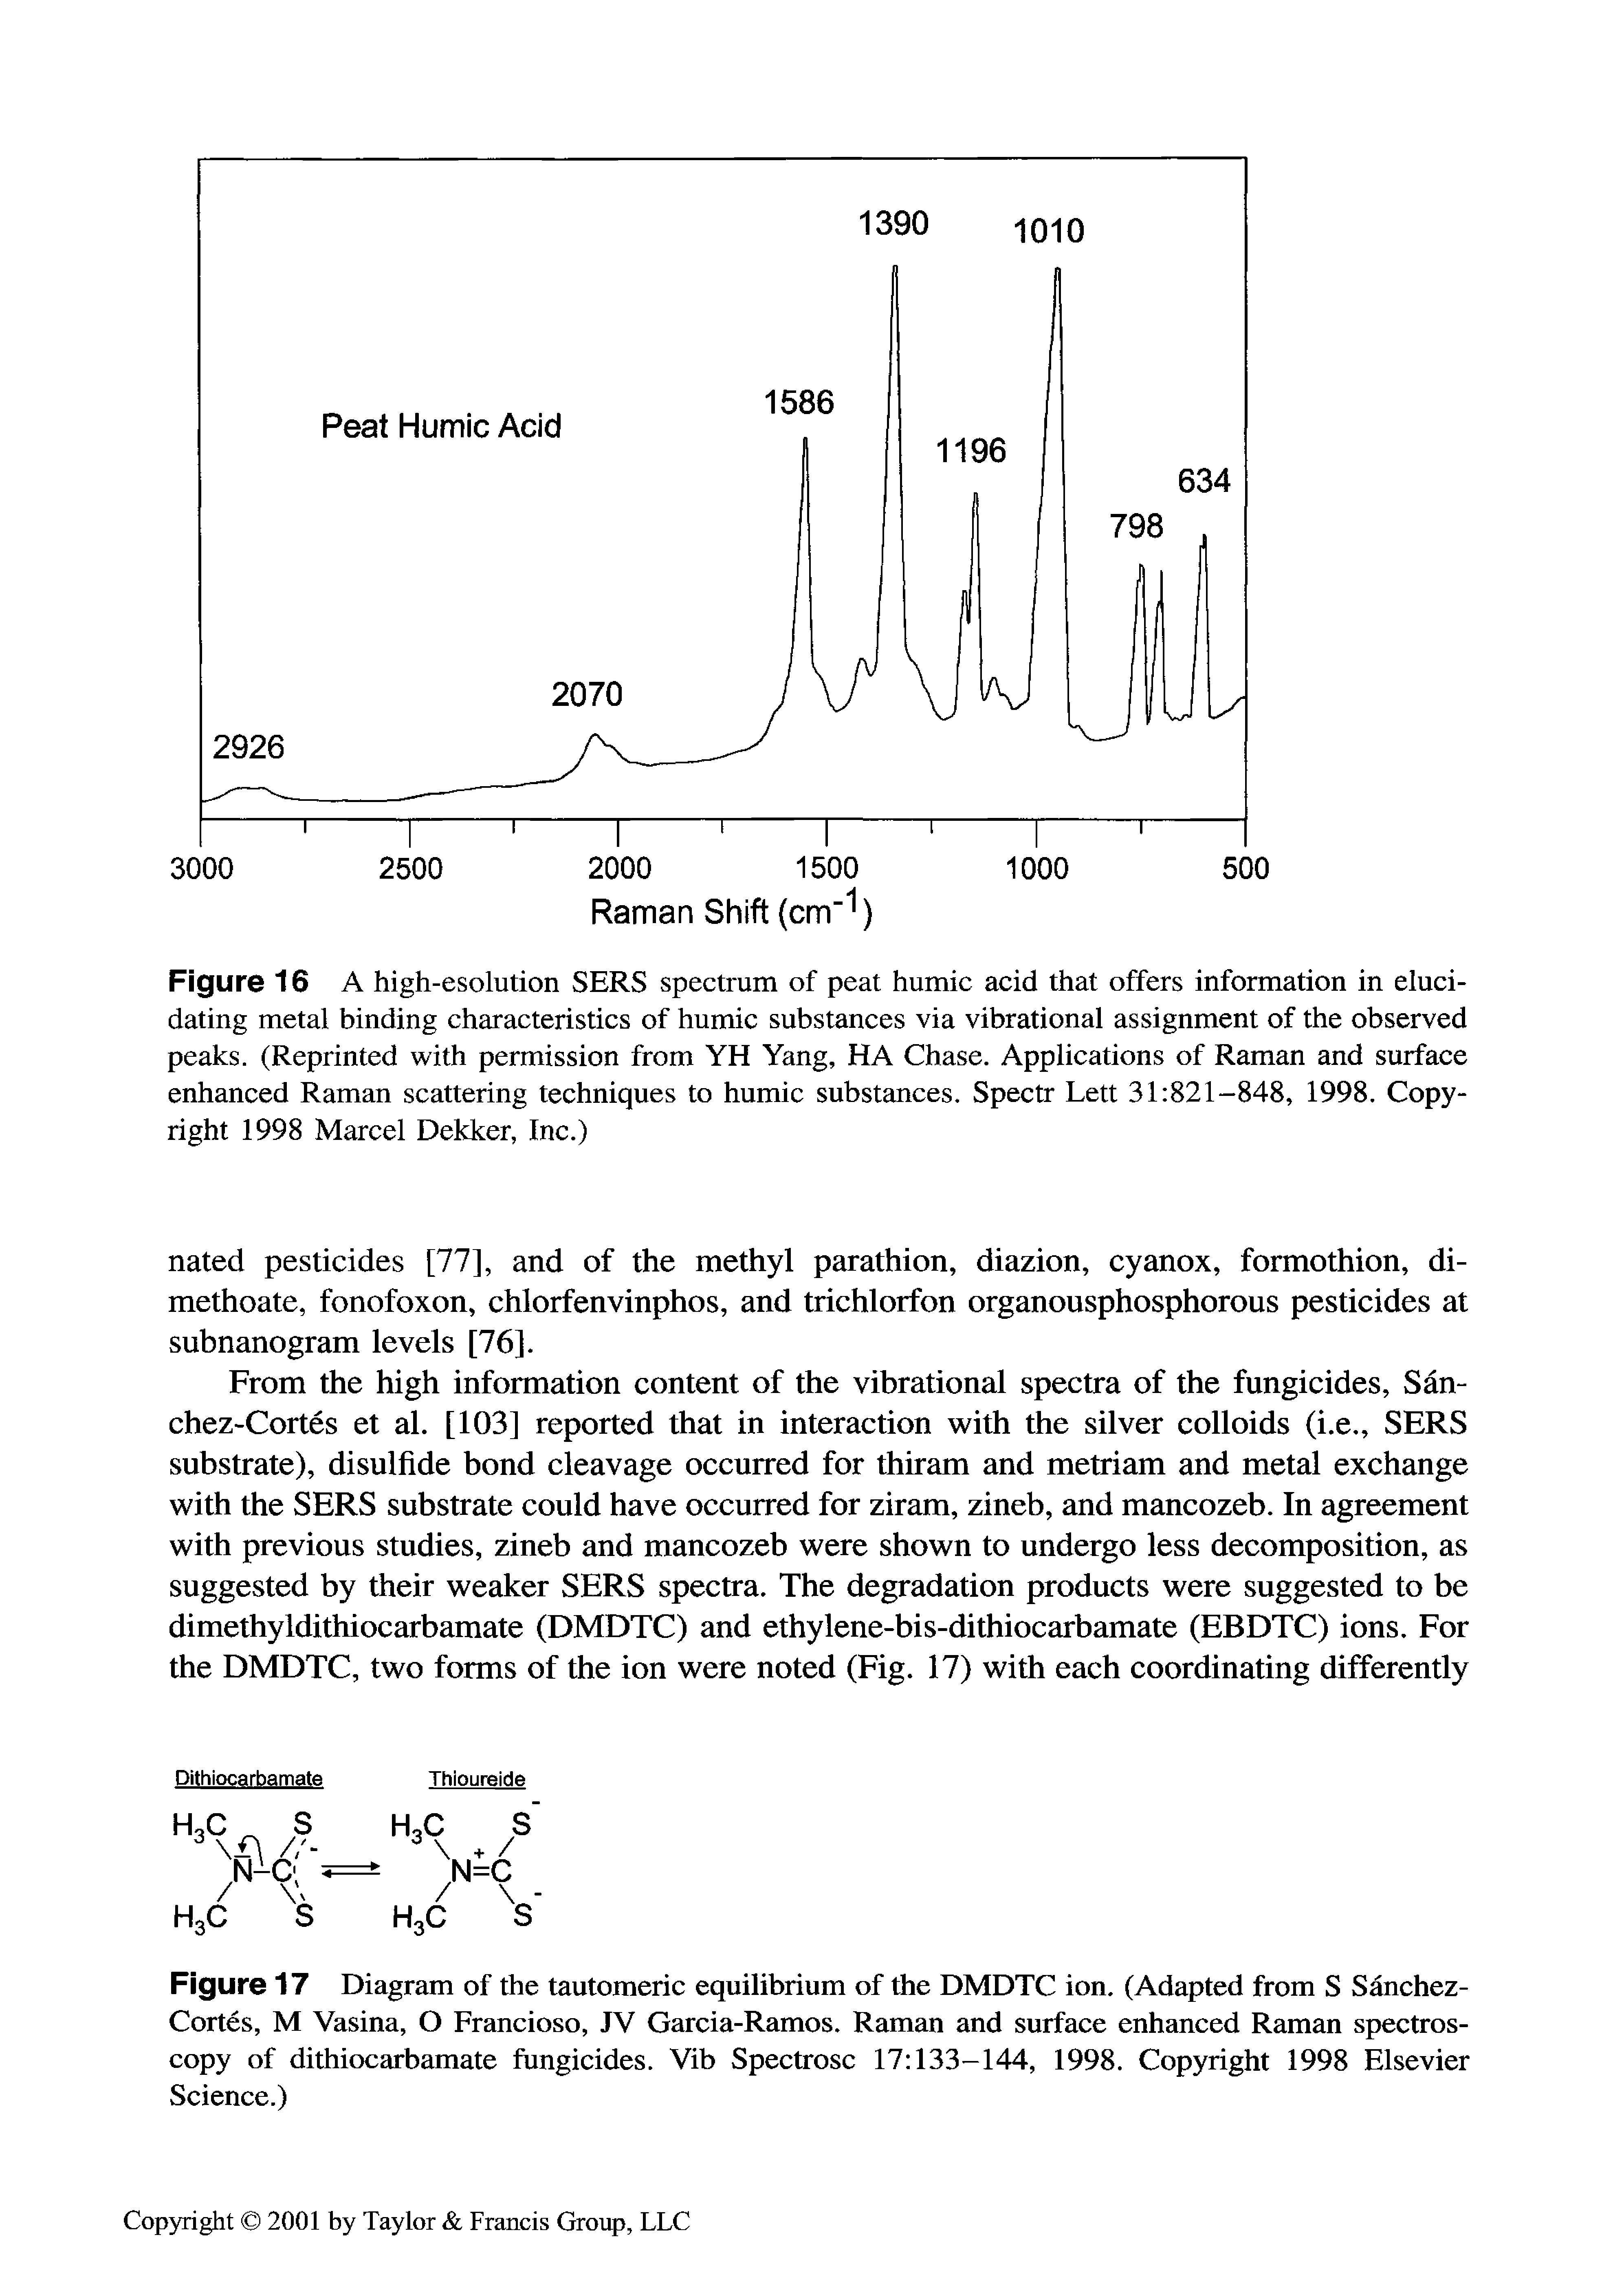 Figure 16 A high-esolution SERS spectrum of peat humic acid that offers information in elucidating metal binding characteristics of humic substances via vibrational assignment of the observed peaks. (Reprinted with permission from YH Yang, HA Chase. Applications of Raman and surface enhanced Raman scattering techniques to humic substances, Spectr Lett 31 821-848, 1998. Copyright 1998 Marcel Dekker, Inc.)...